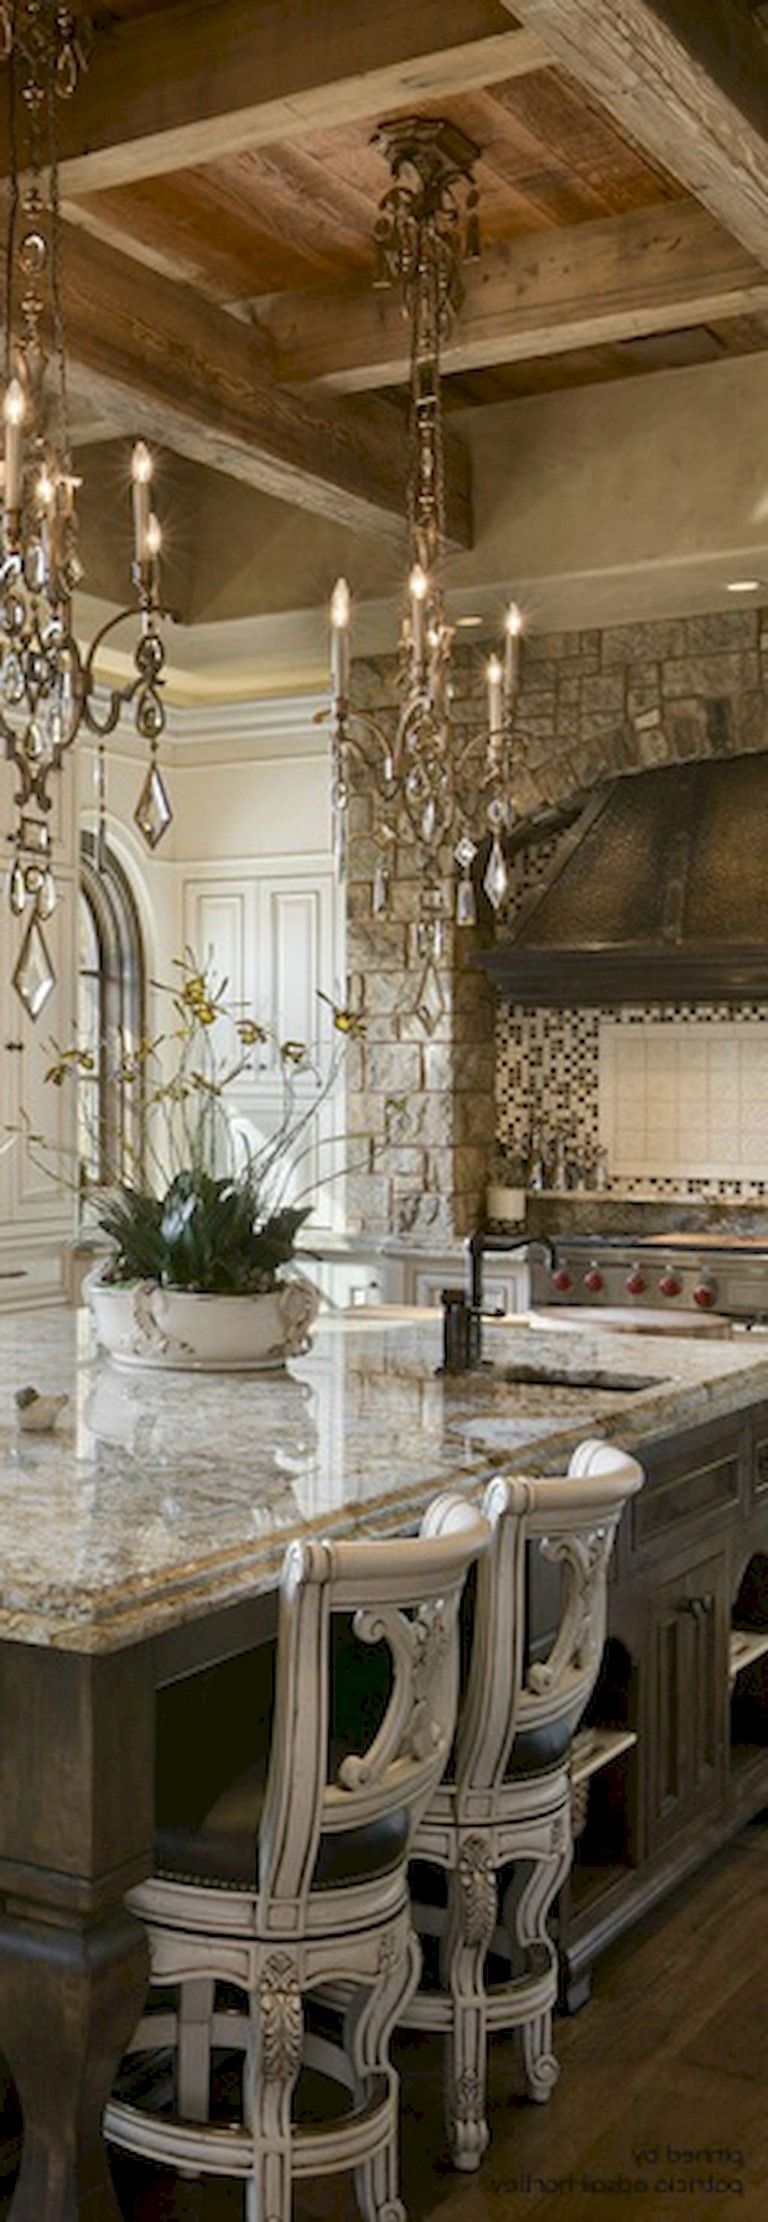 57+ Amazing French Country Kitchen Design and Decor Ideas - Page 58 of 58 -   24 country home garden
 ideas